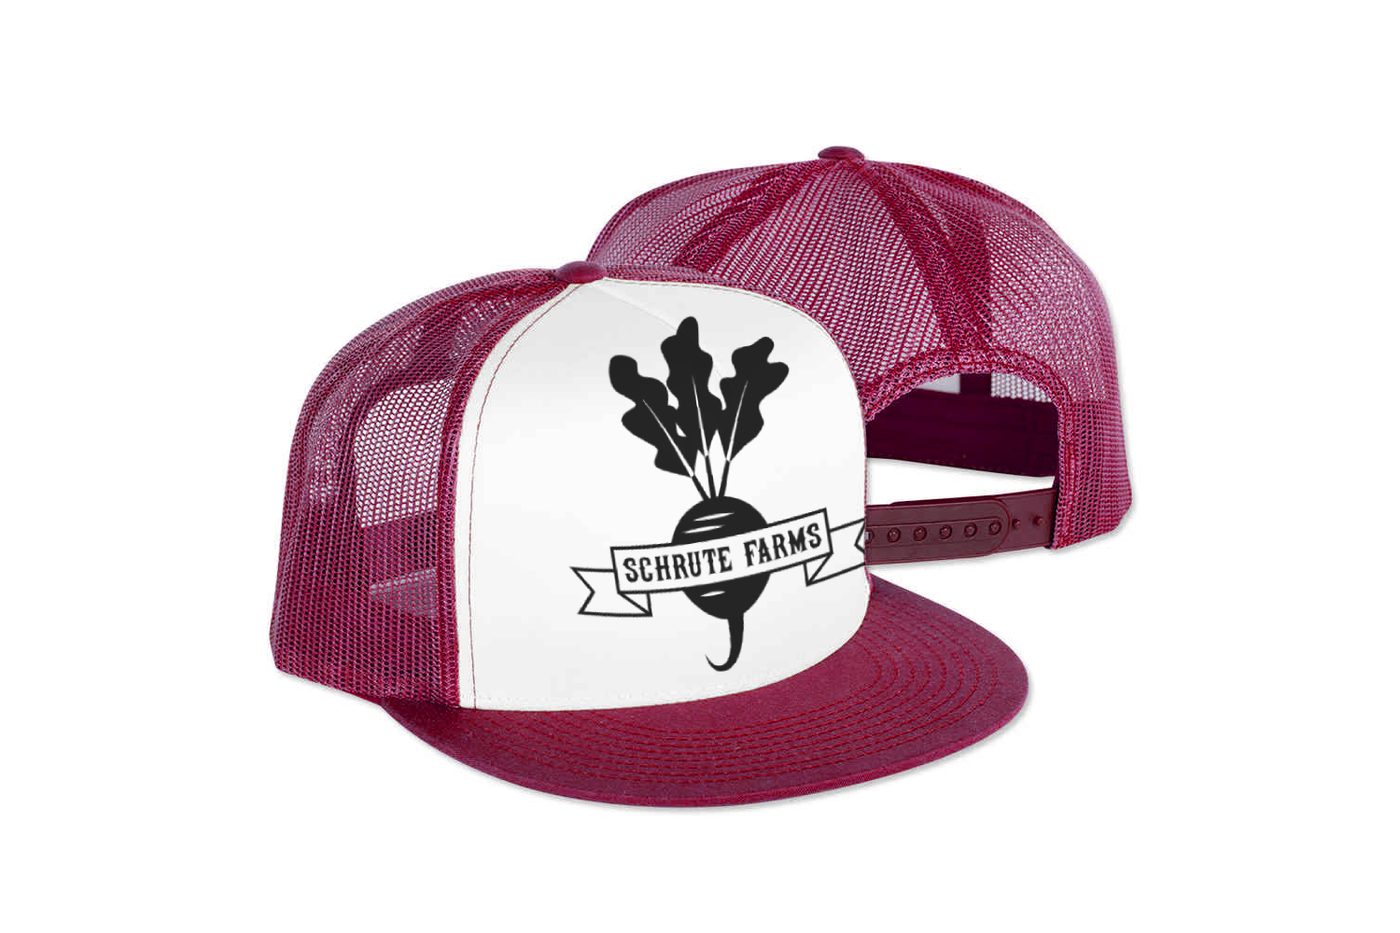 Beet design with a ribbon that says "Schrute Farms"